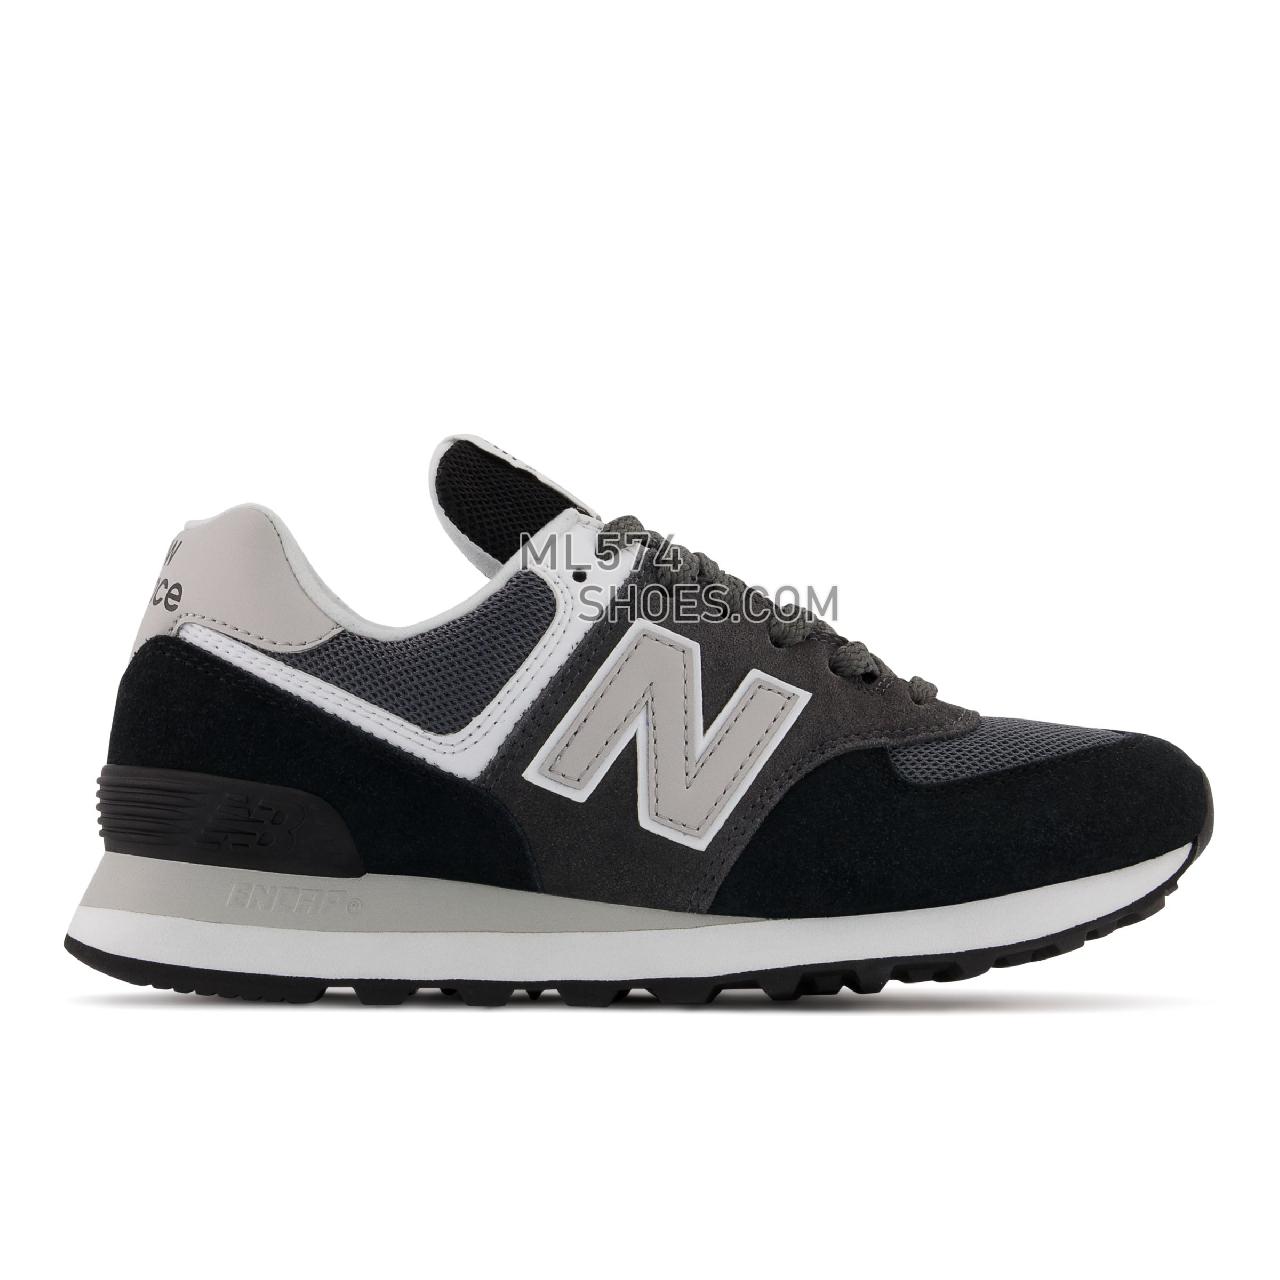 New Balance 574v2 - Women's Classic Sneakers - Black with Magnet - WL574VI1